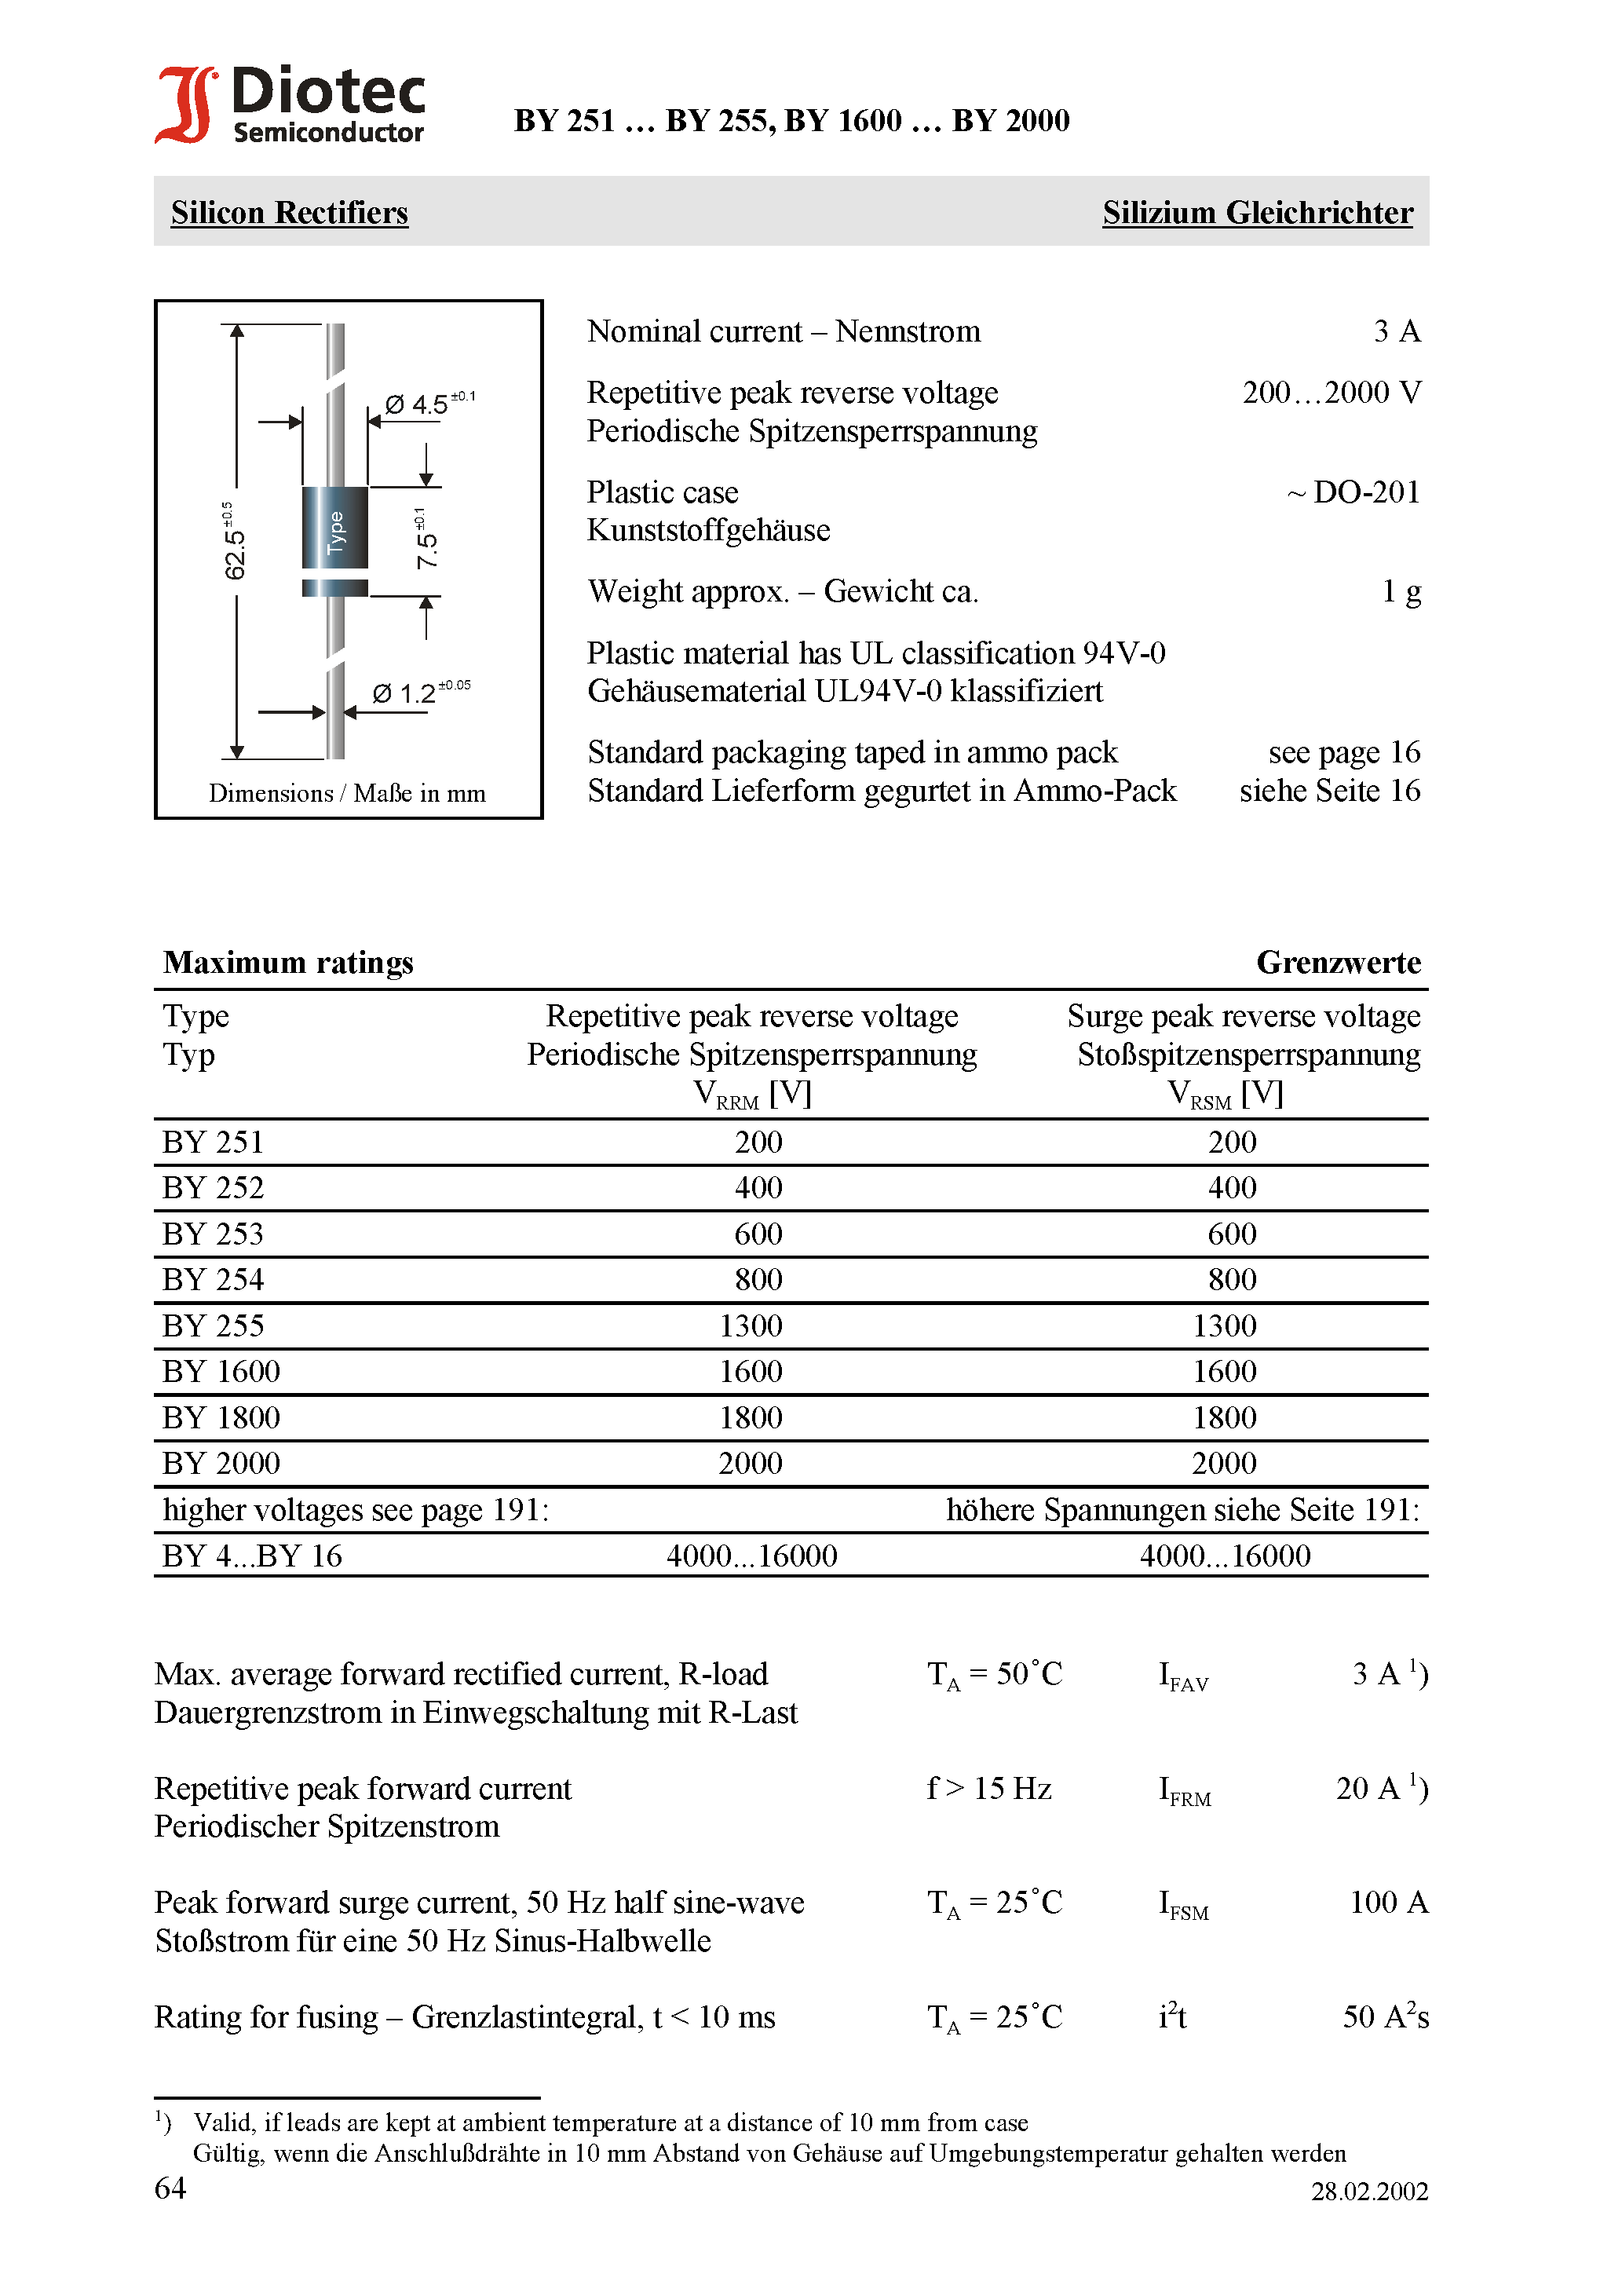 Datasheet BY1600 - Silicon Rectifiers page 1